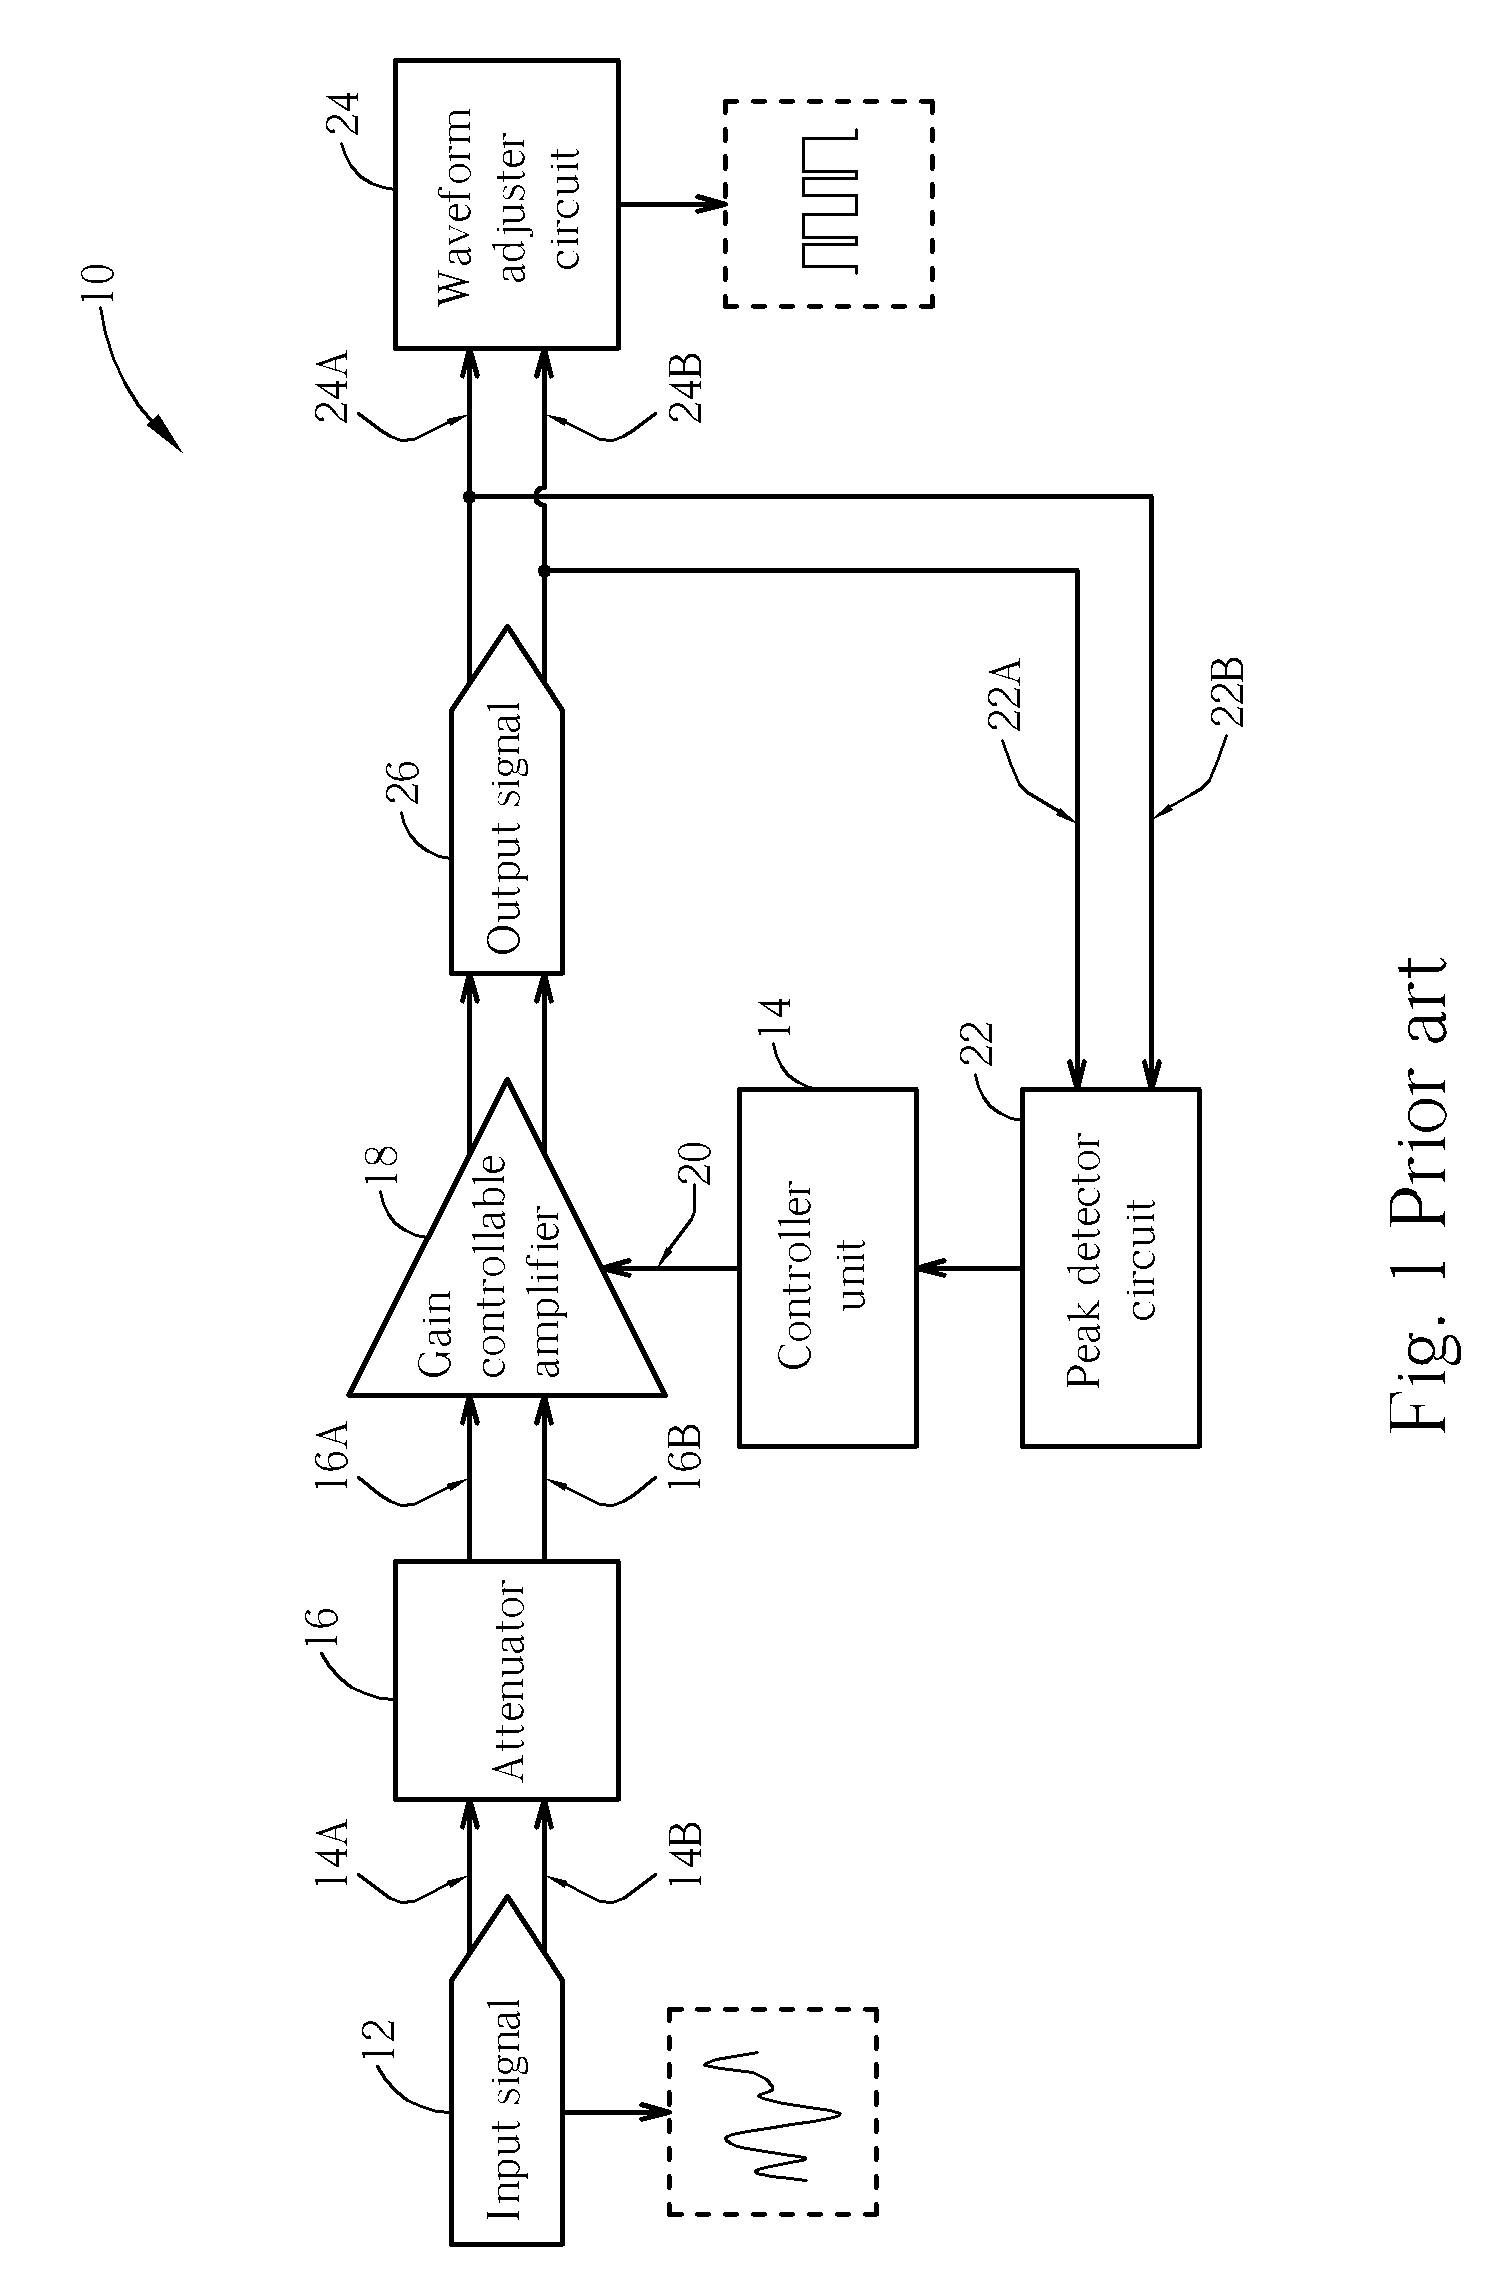 Signal processing circuit for optical disc drivers and the related method